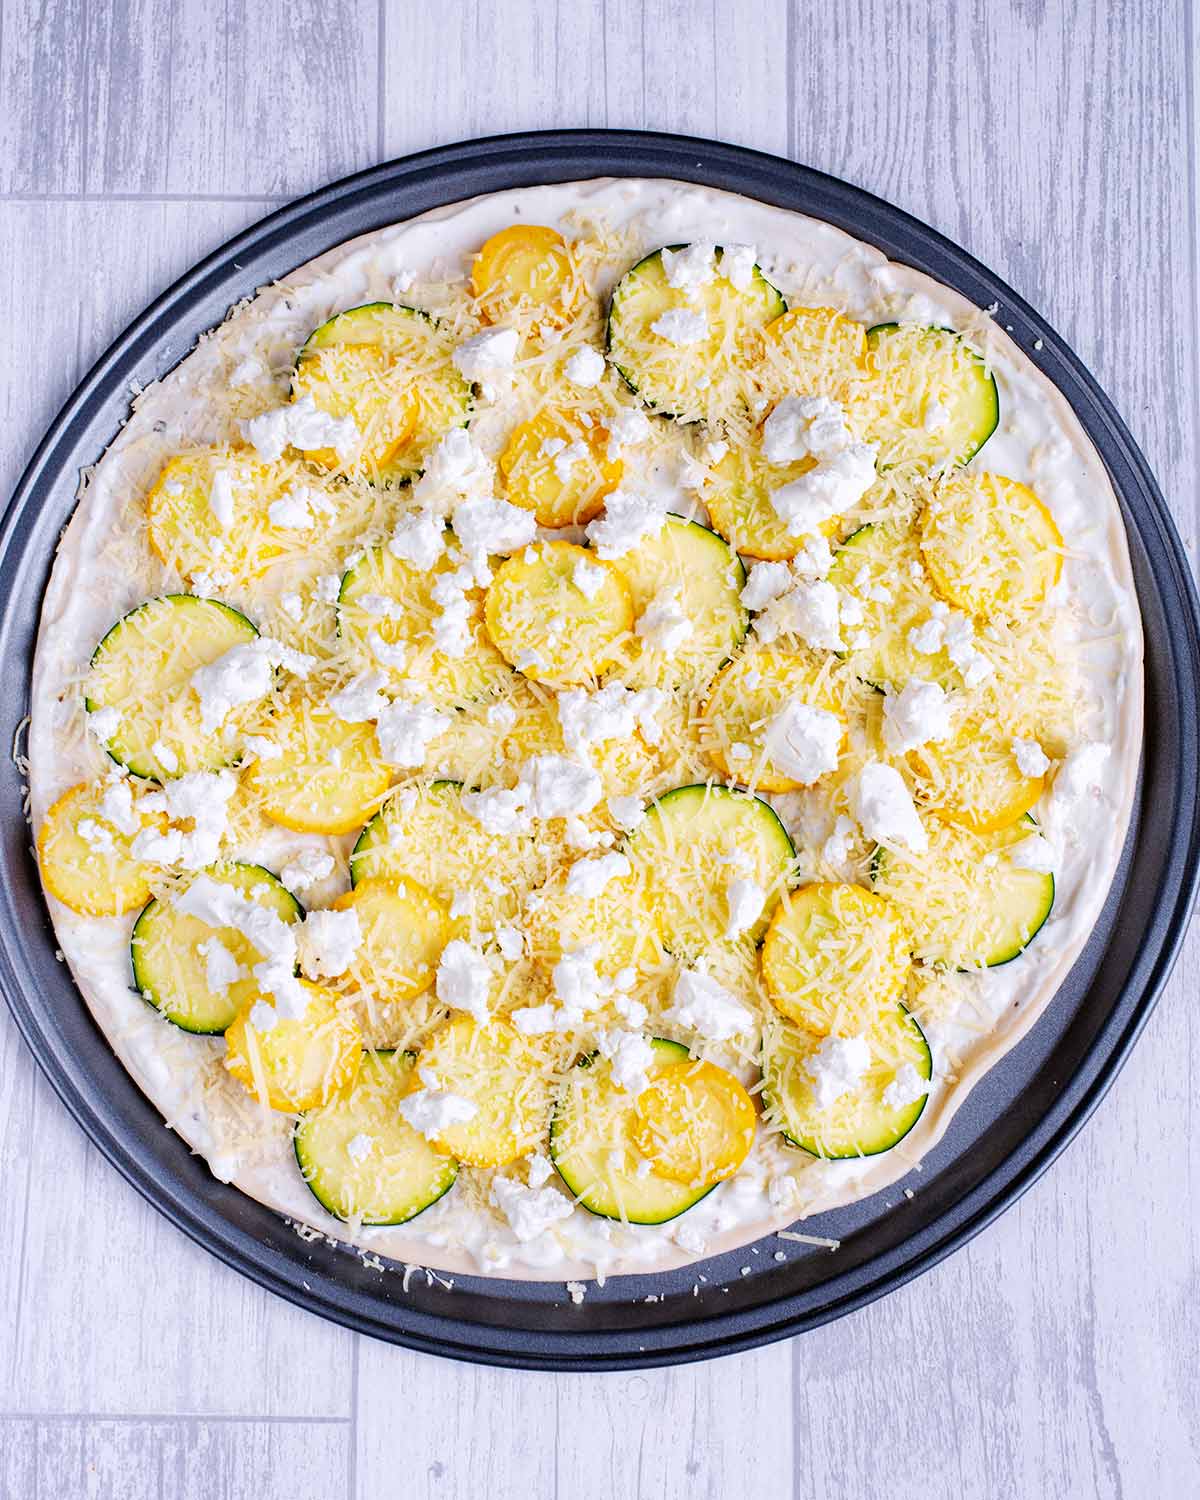 A pizza base topped with a yogurt sauce, sliced courgette and cheese.